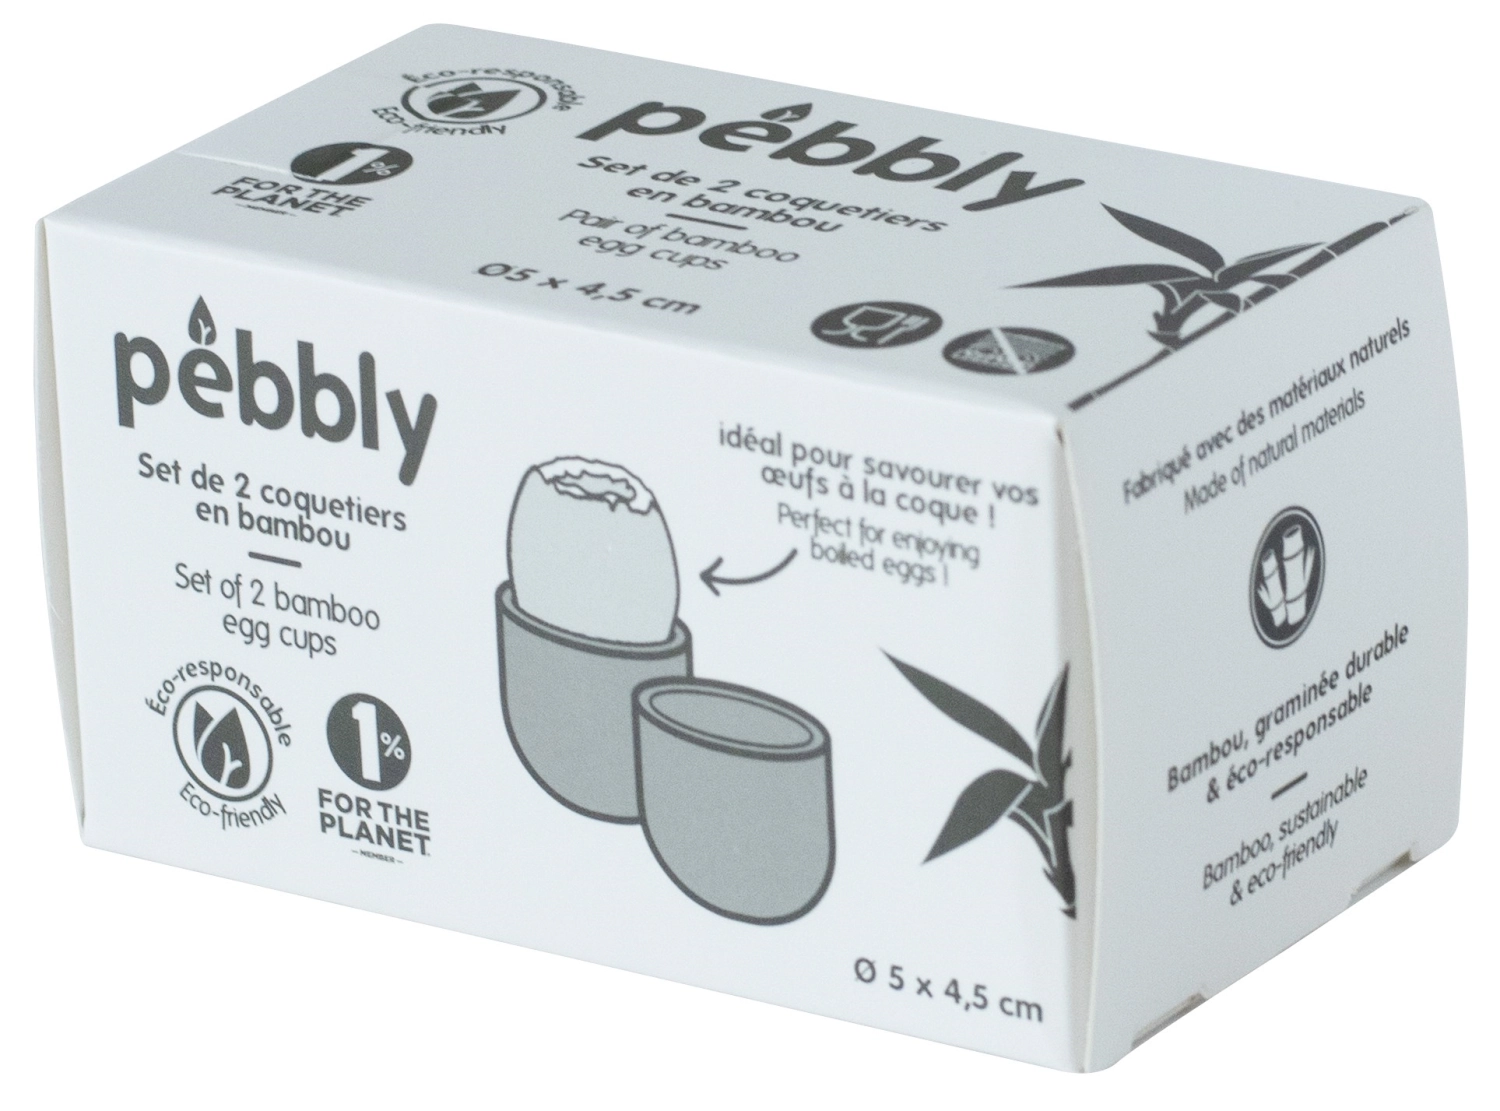 2 x pebbly coquetiers, bambou, d5 x 4.5cm